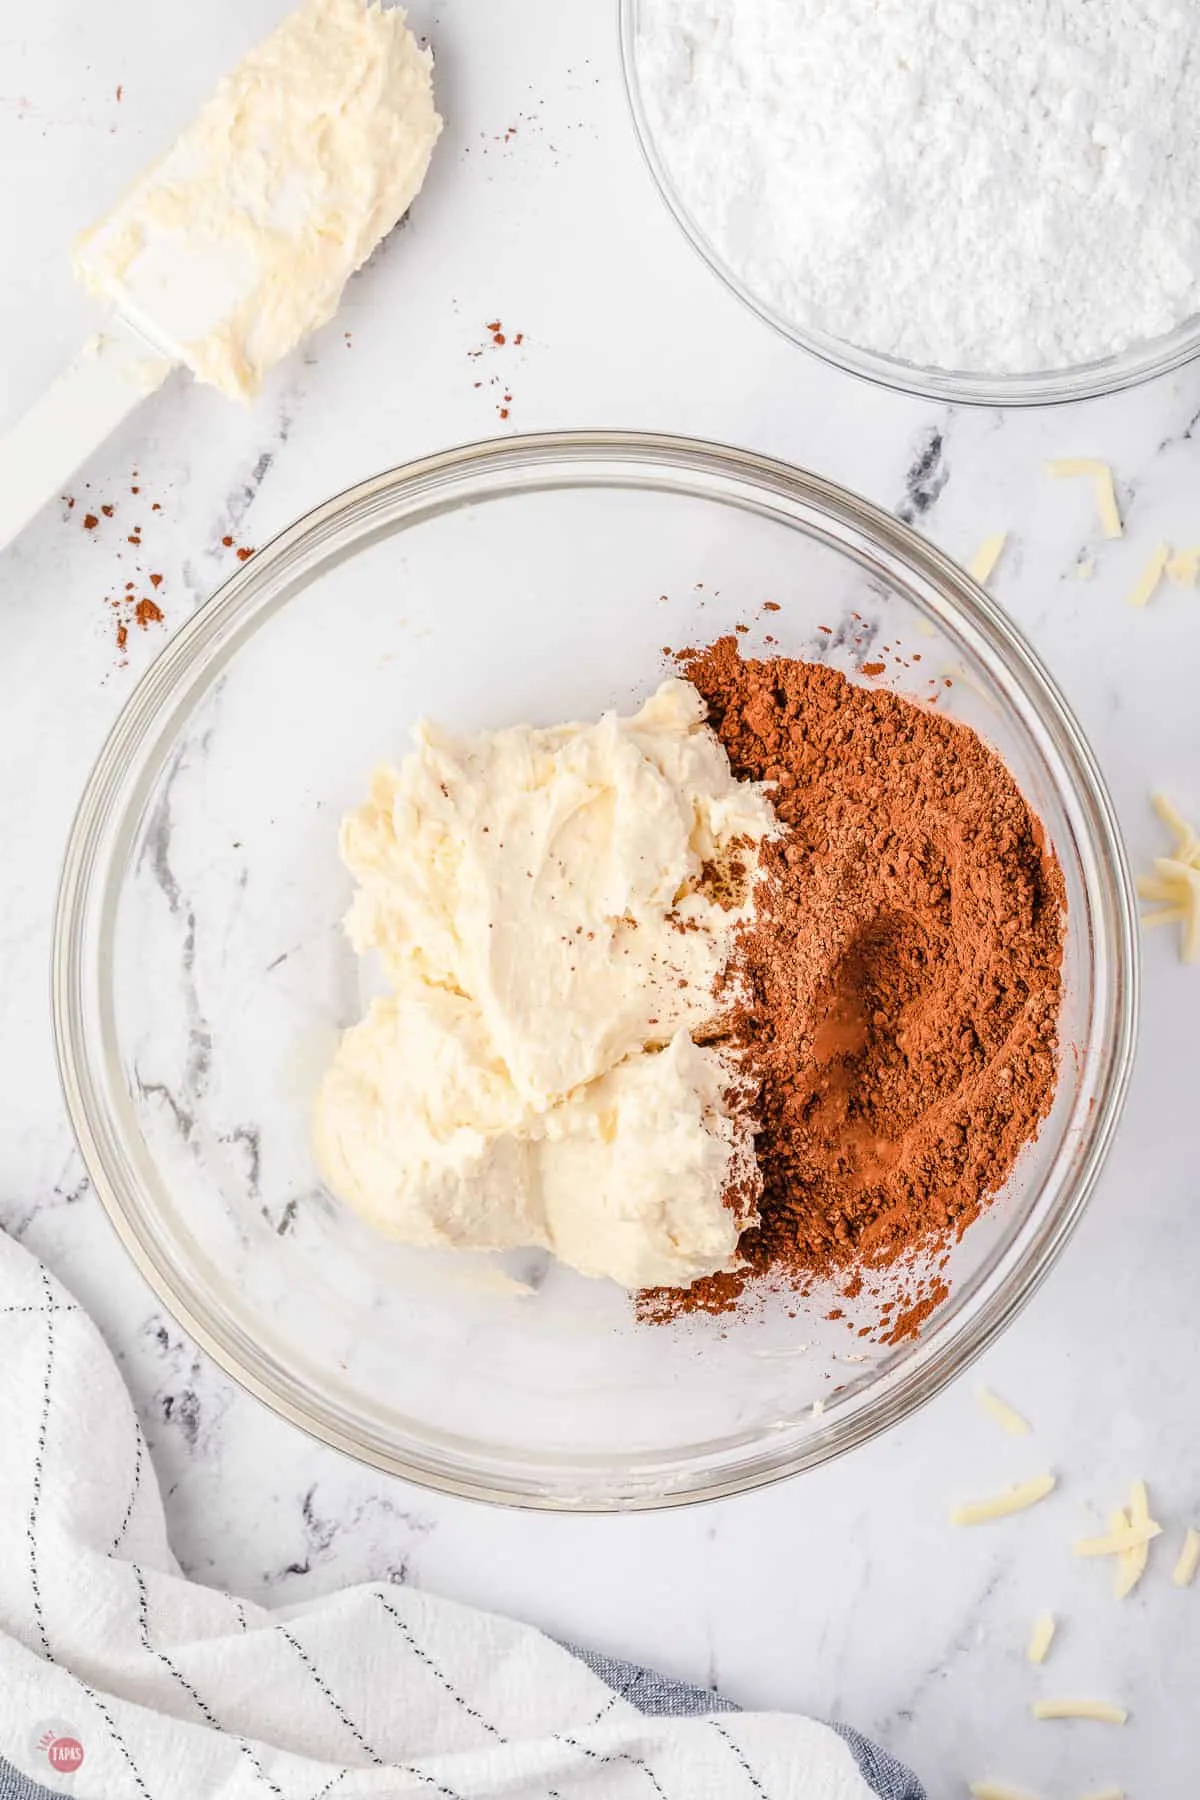 butter and cocoa powder in a bowl